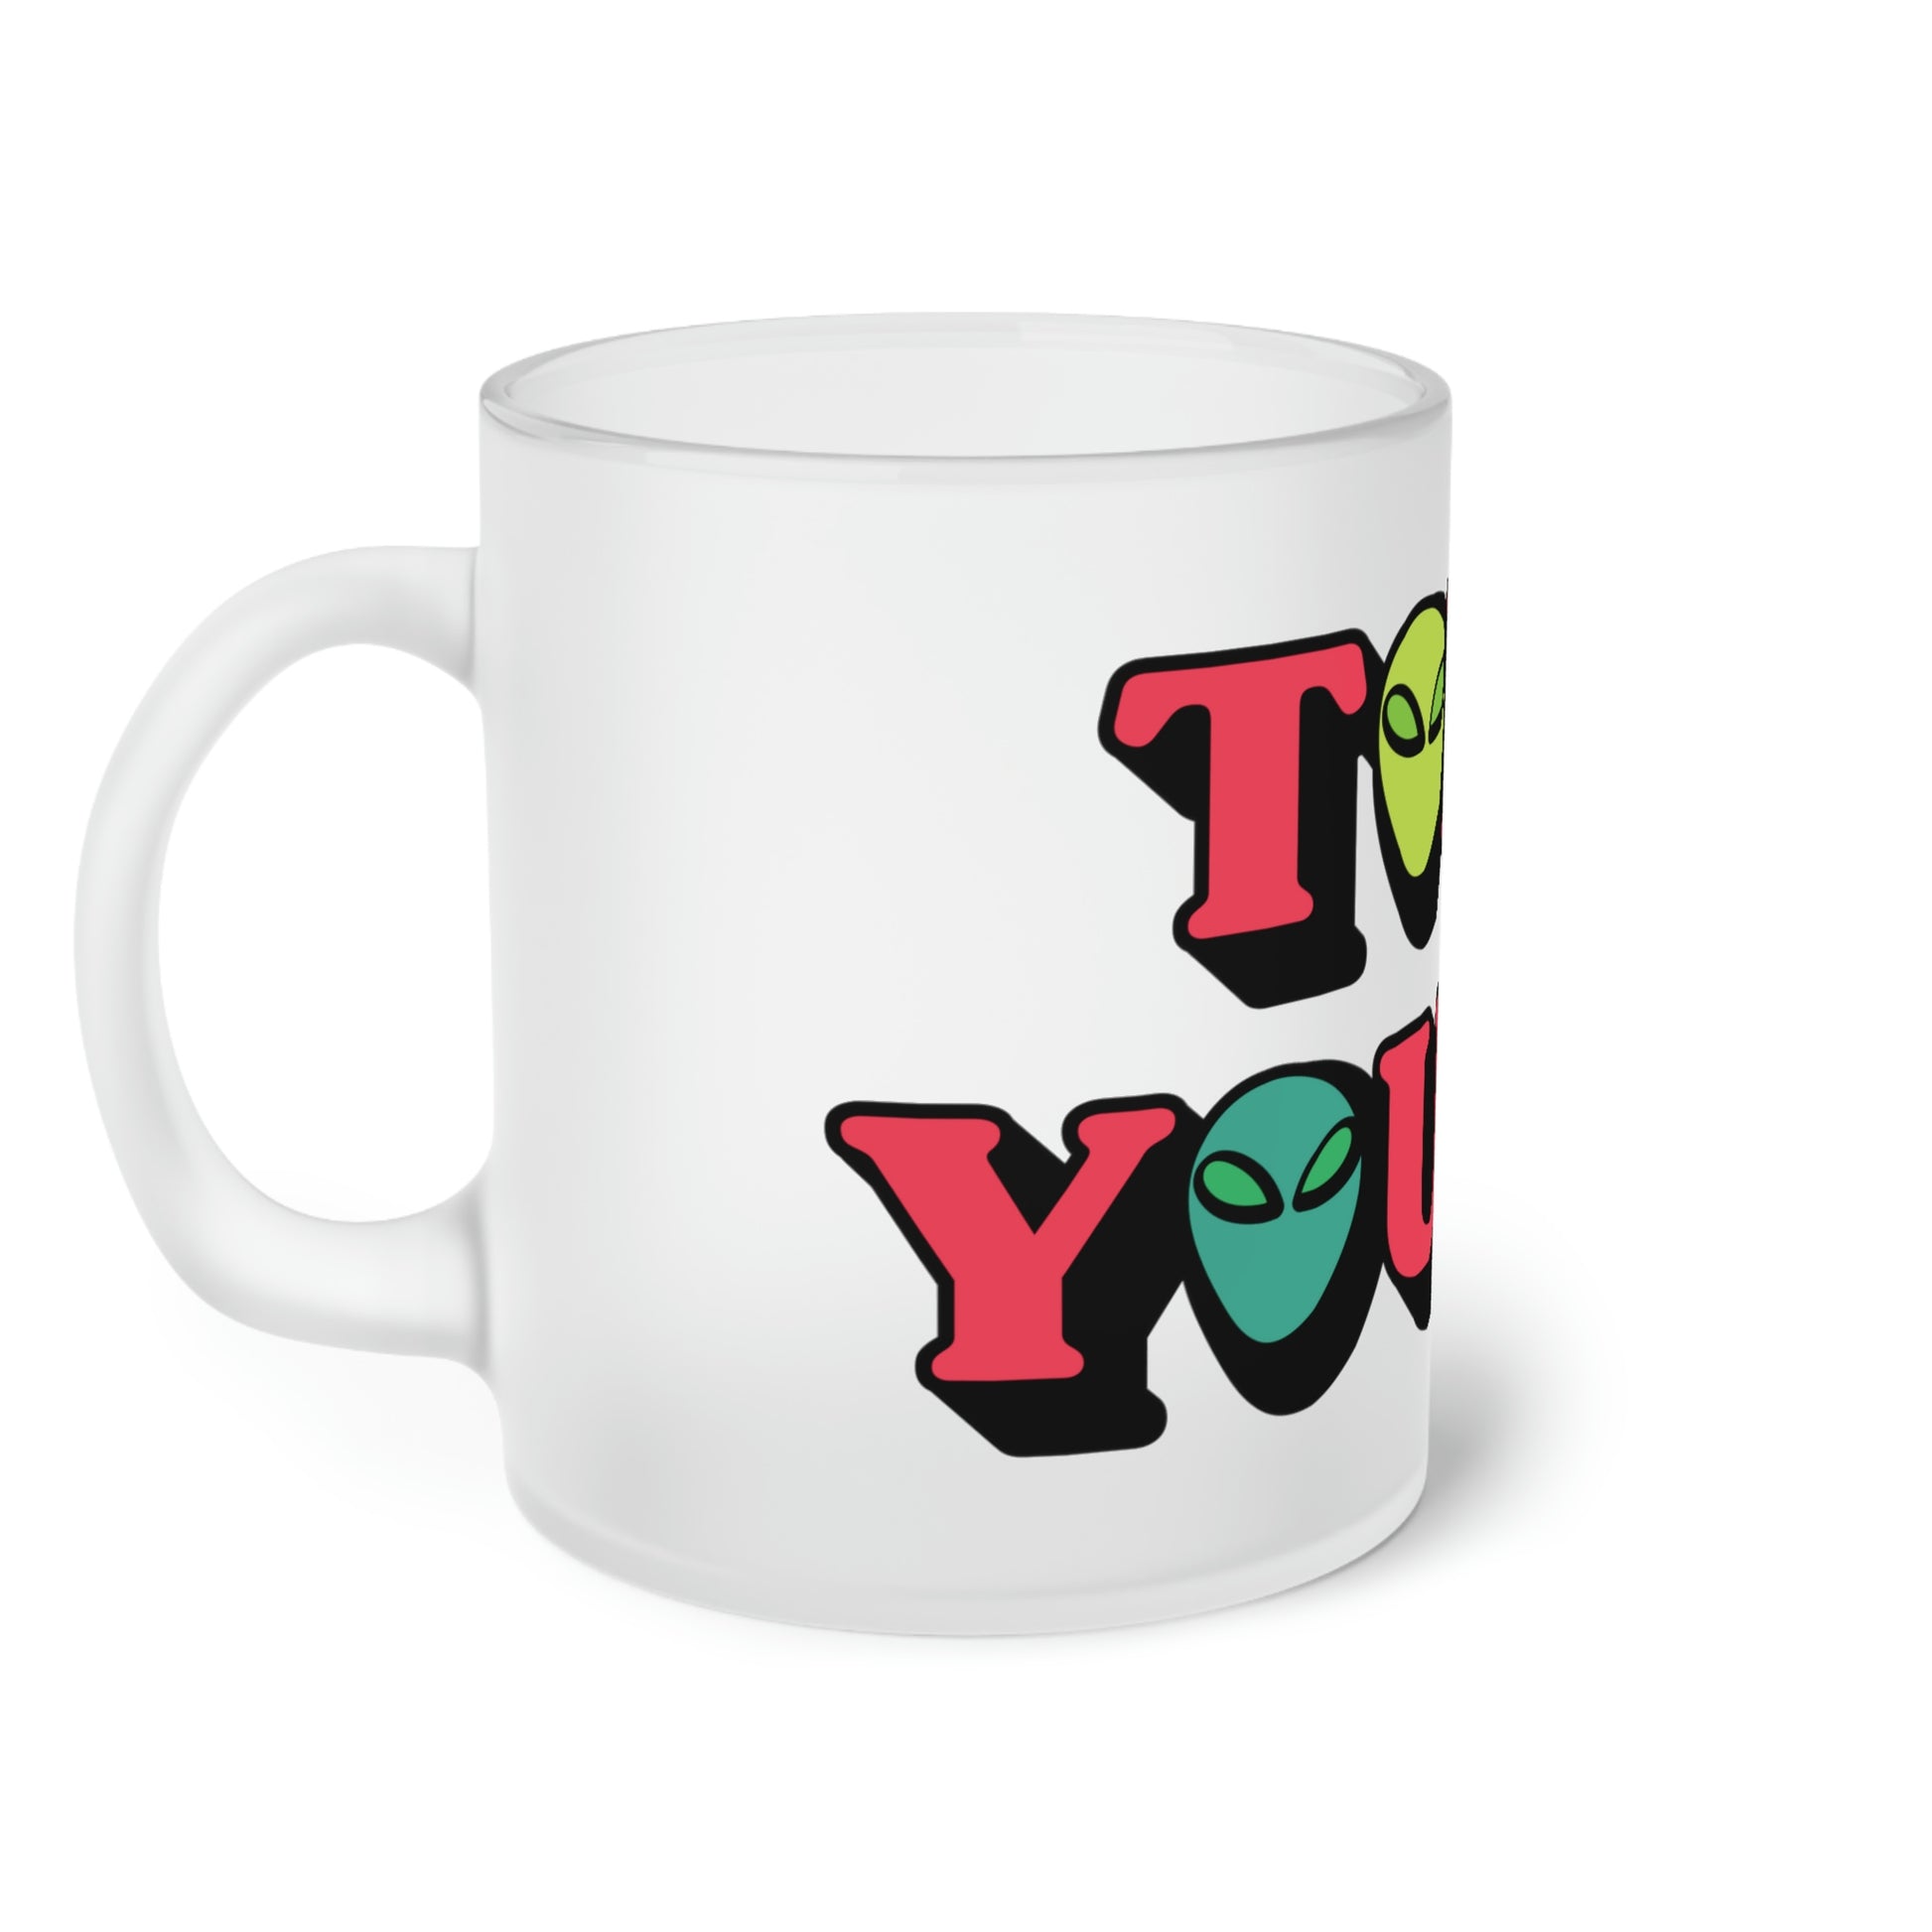 #WEIRDO | This awesome frosted mug is specially designed for you weirdos who know the Aliens are already here! This mug is printed with our favorite TOLD YOU SO meme!